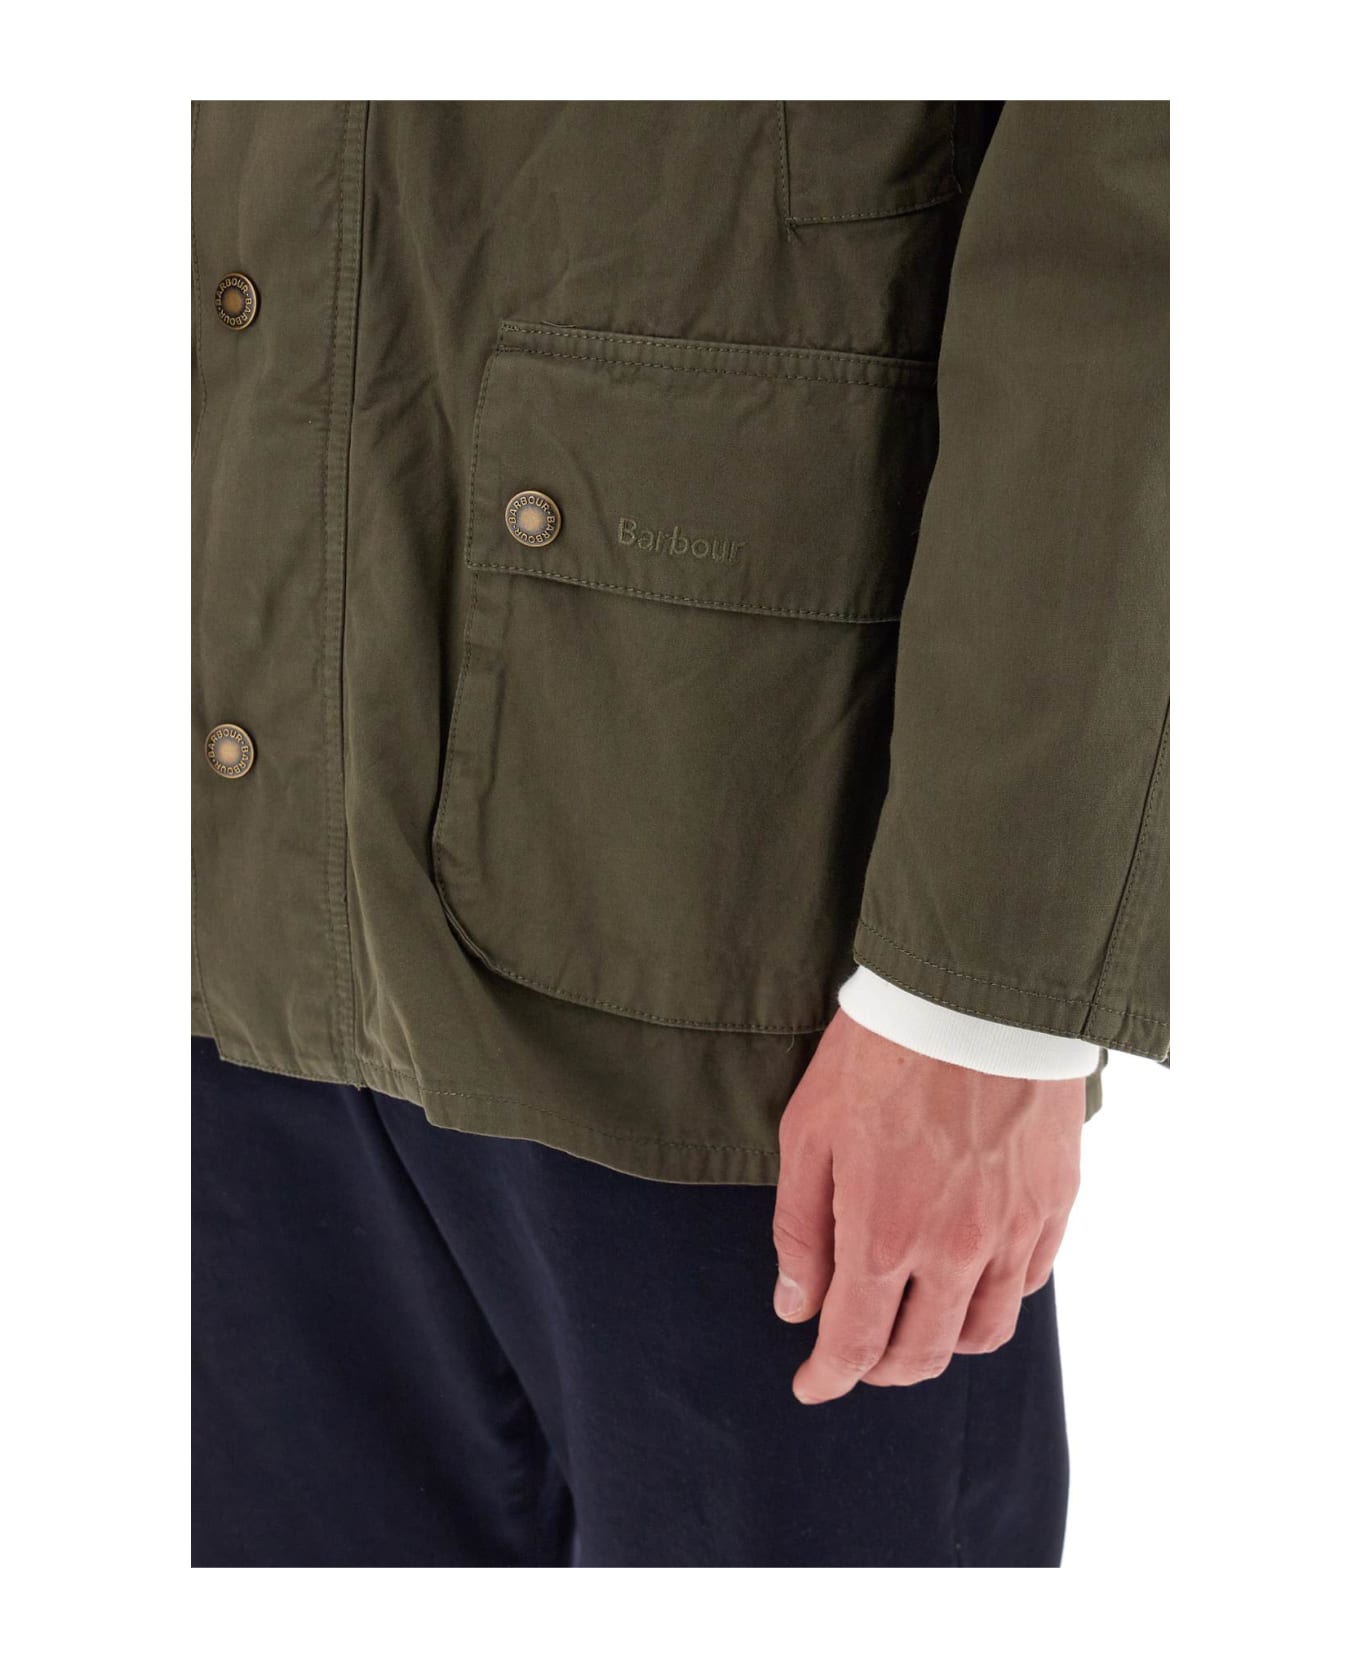 Barbour 'ashby' Casual Jacket - Olive ダウンジャケット